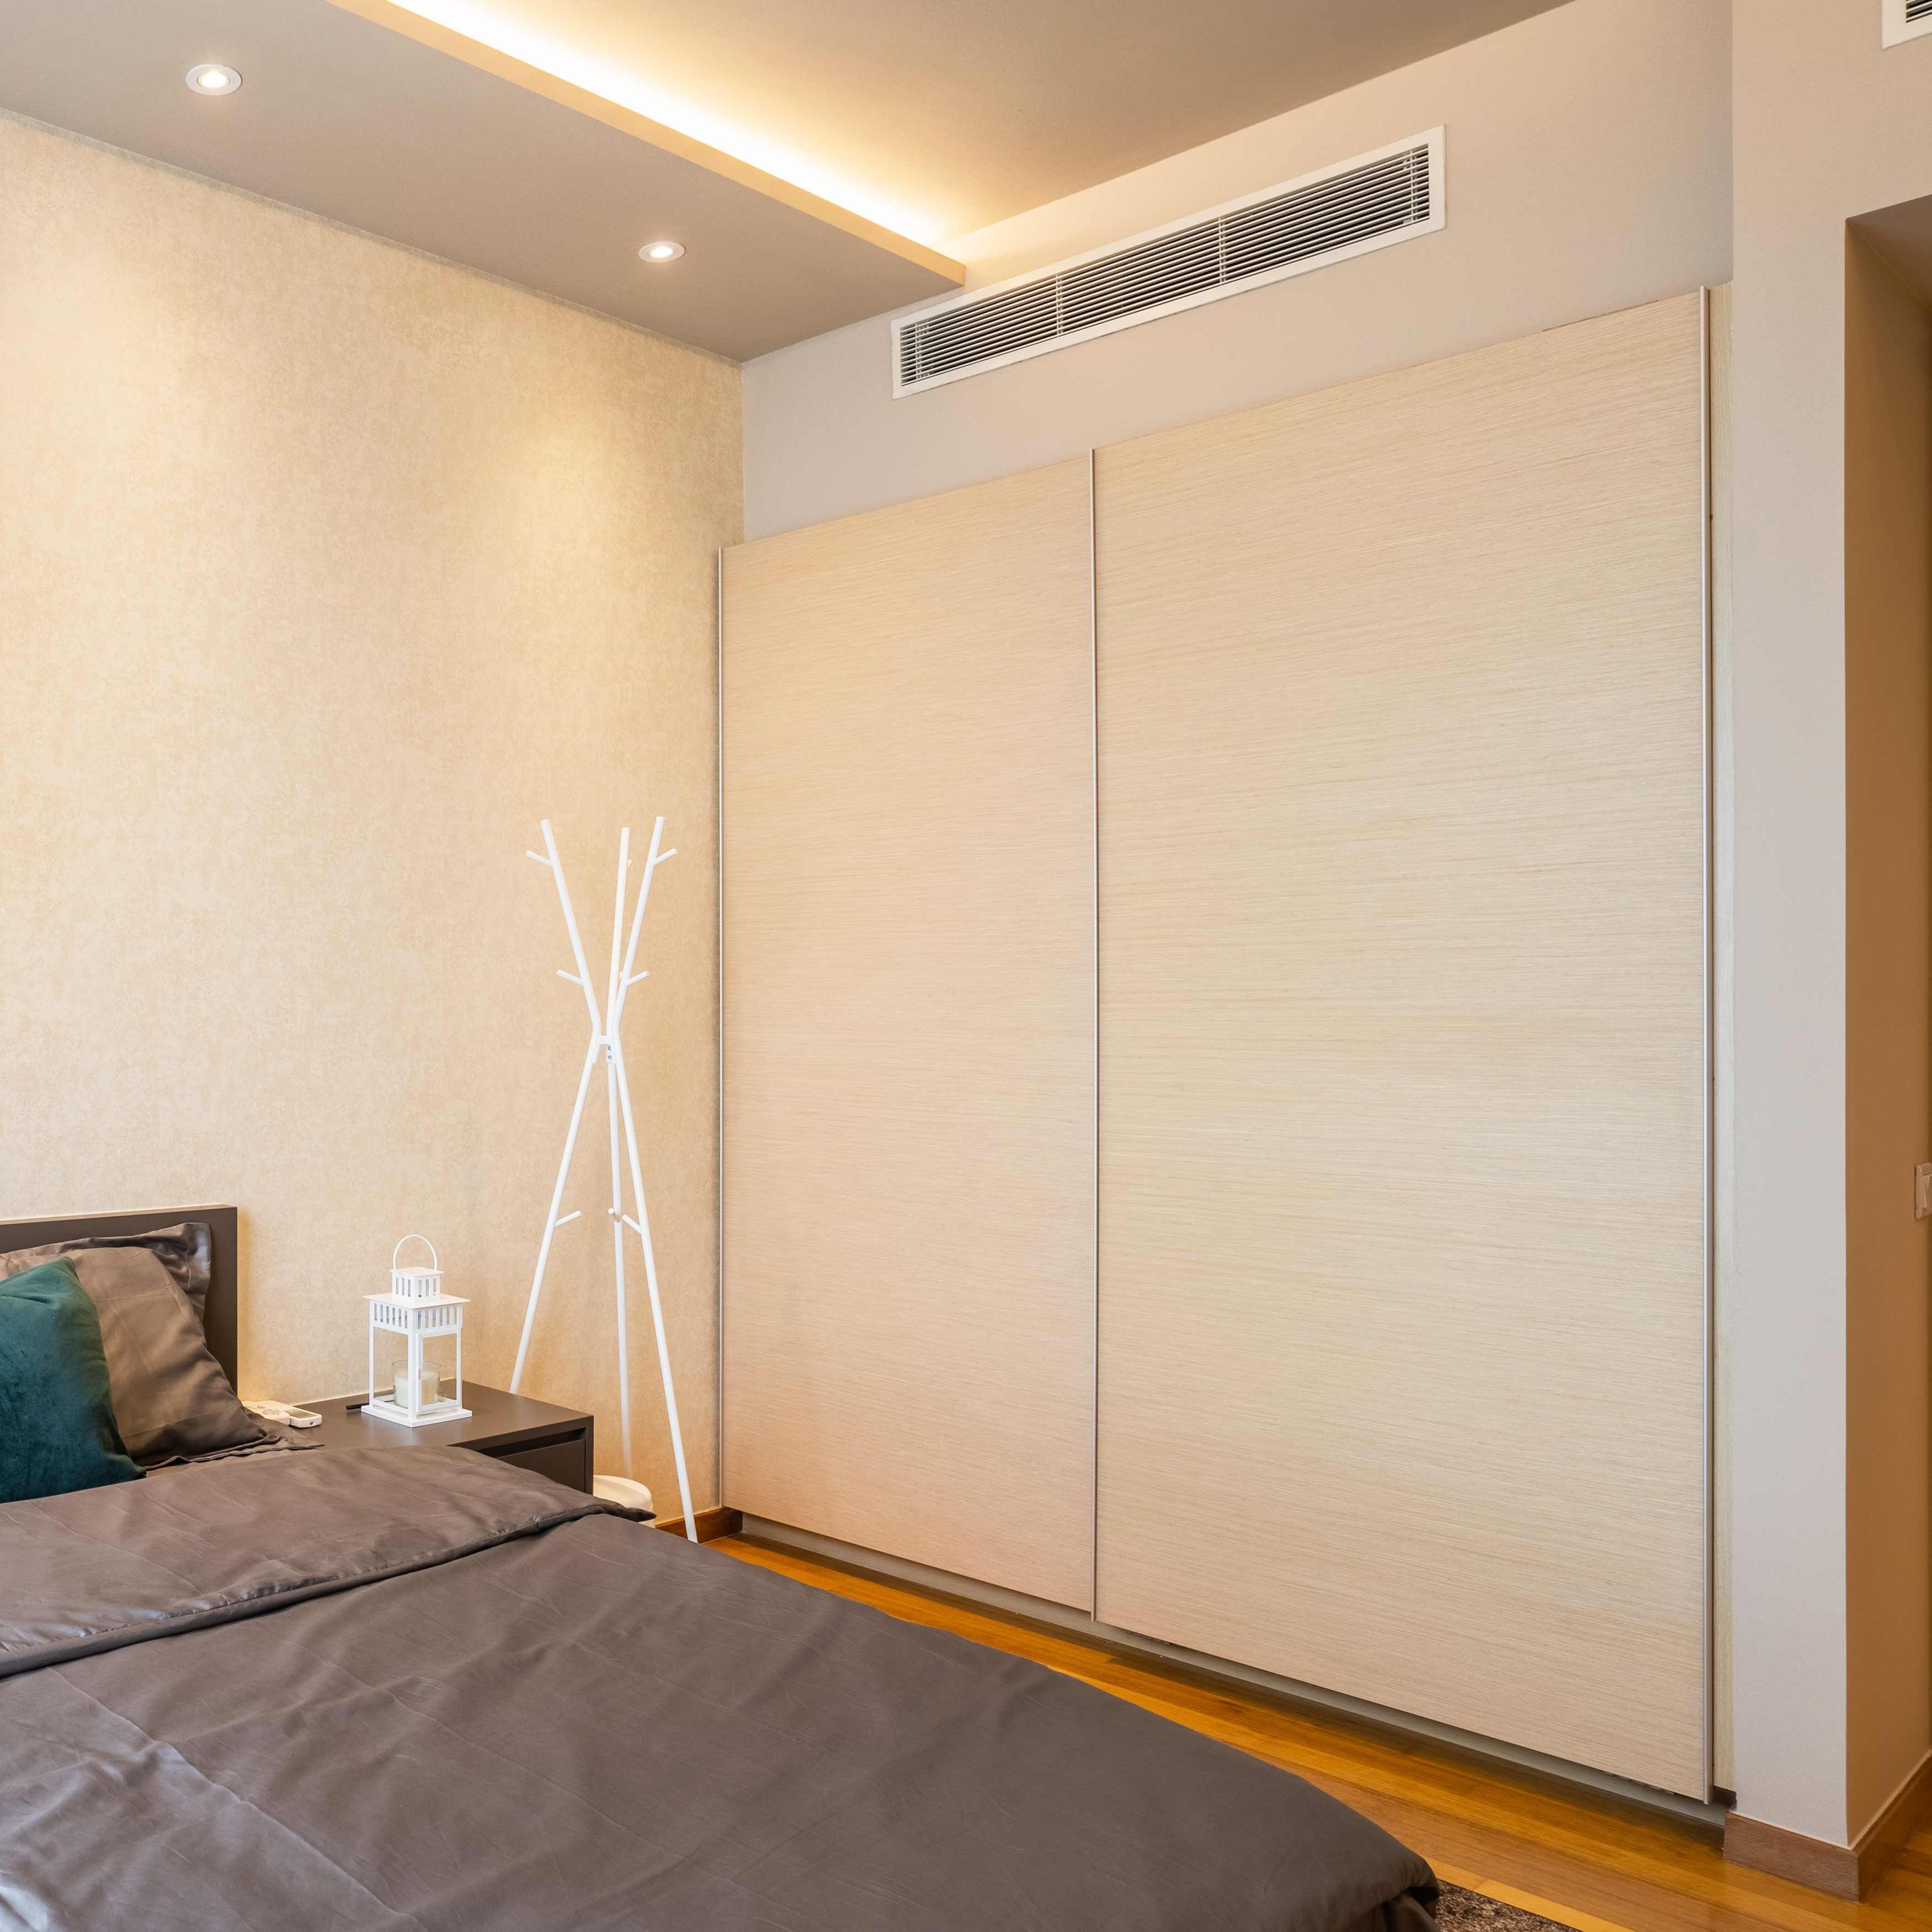 Spacious Bedroom Wardrobe Design With Modern Sliding Shutters